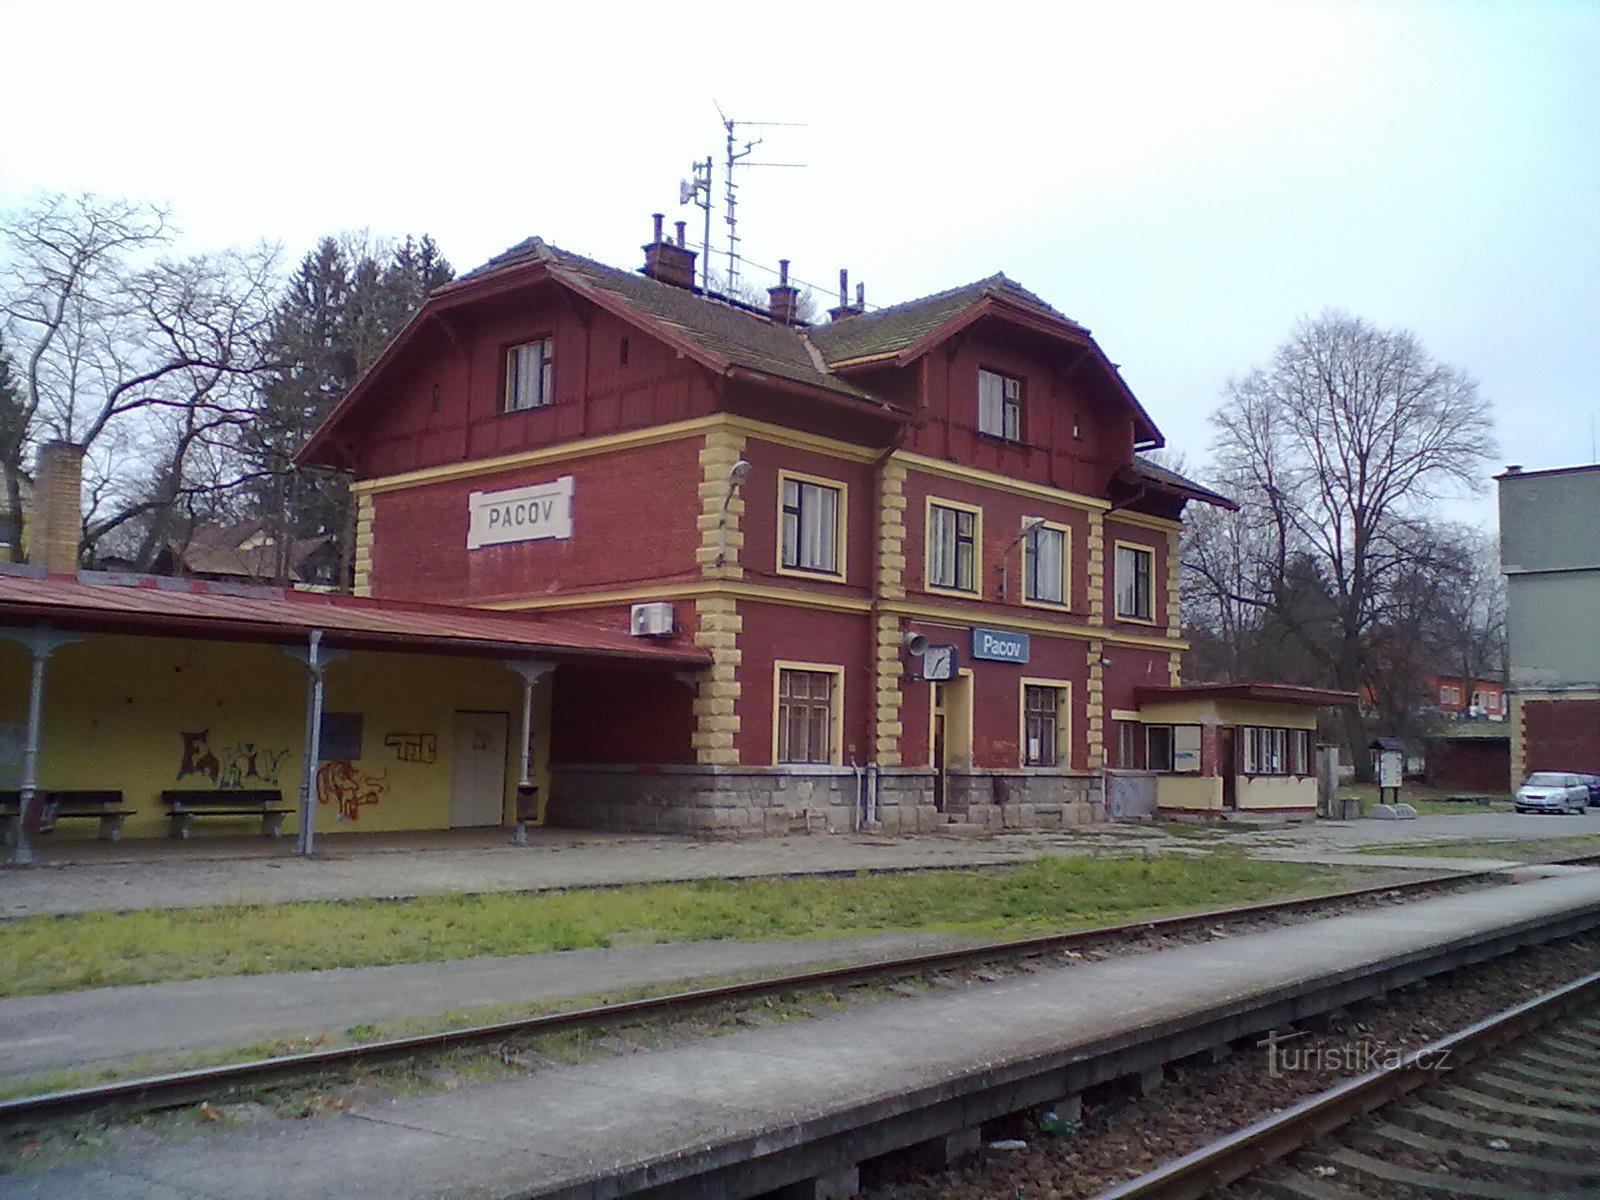 2. Railway station in Pacov, the start and end of our hike.